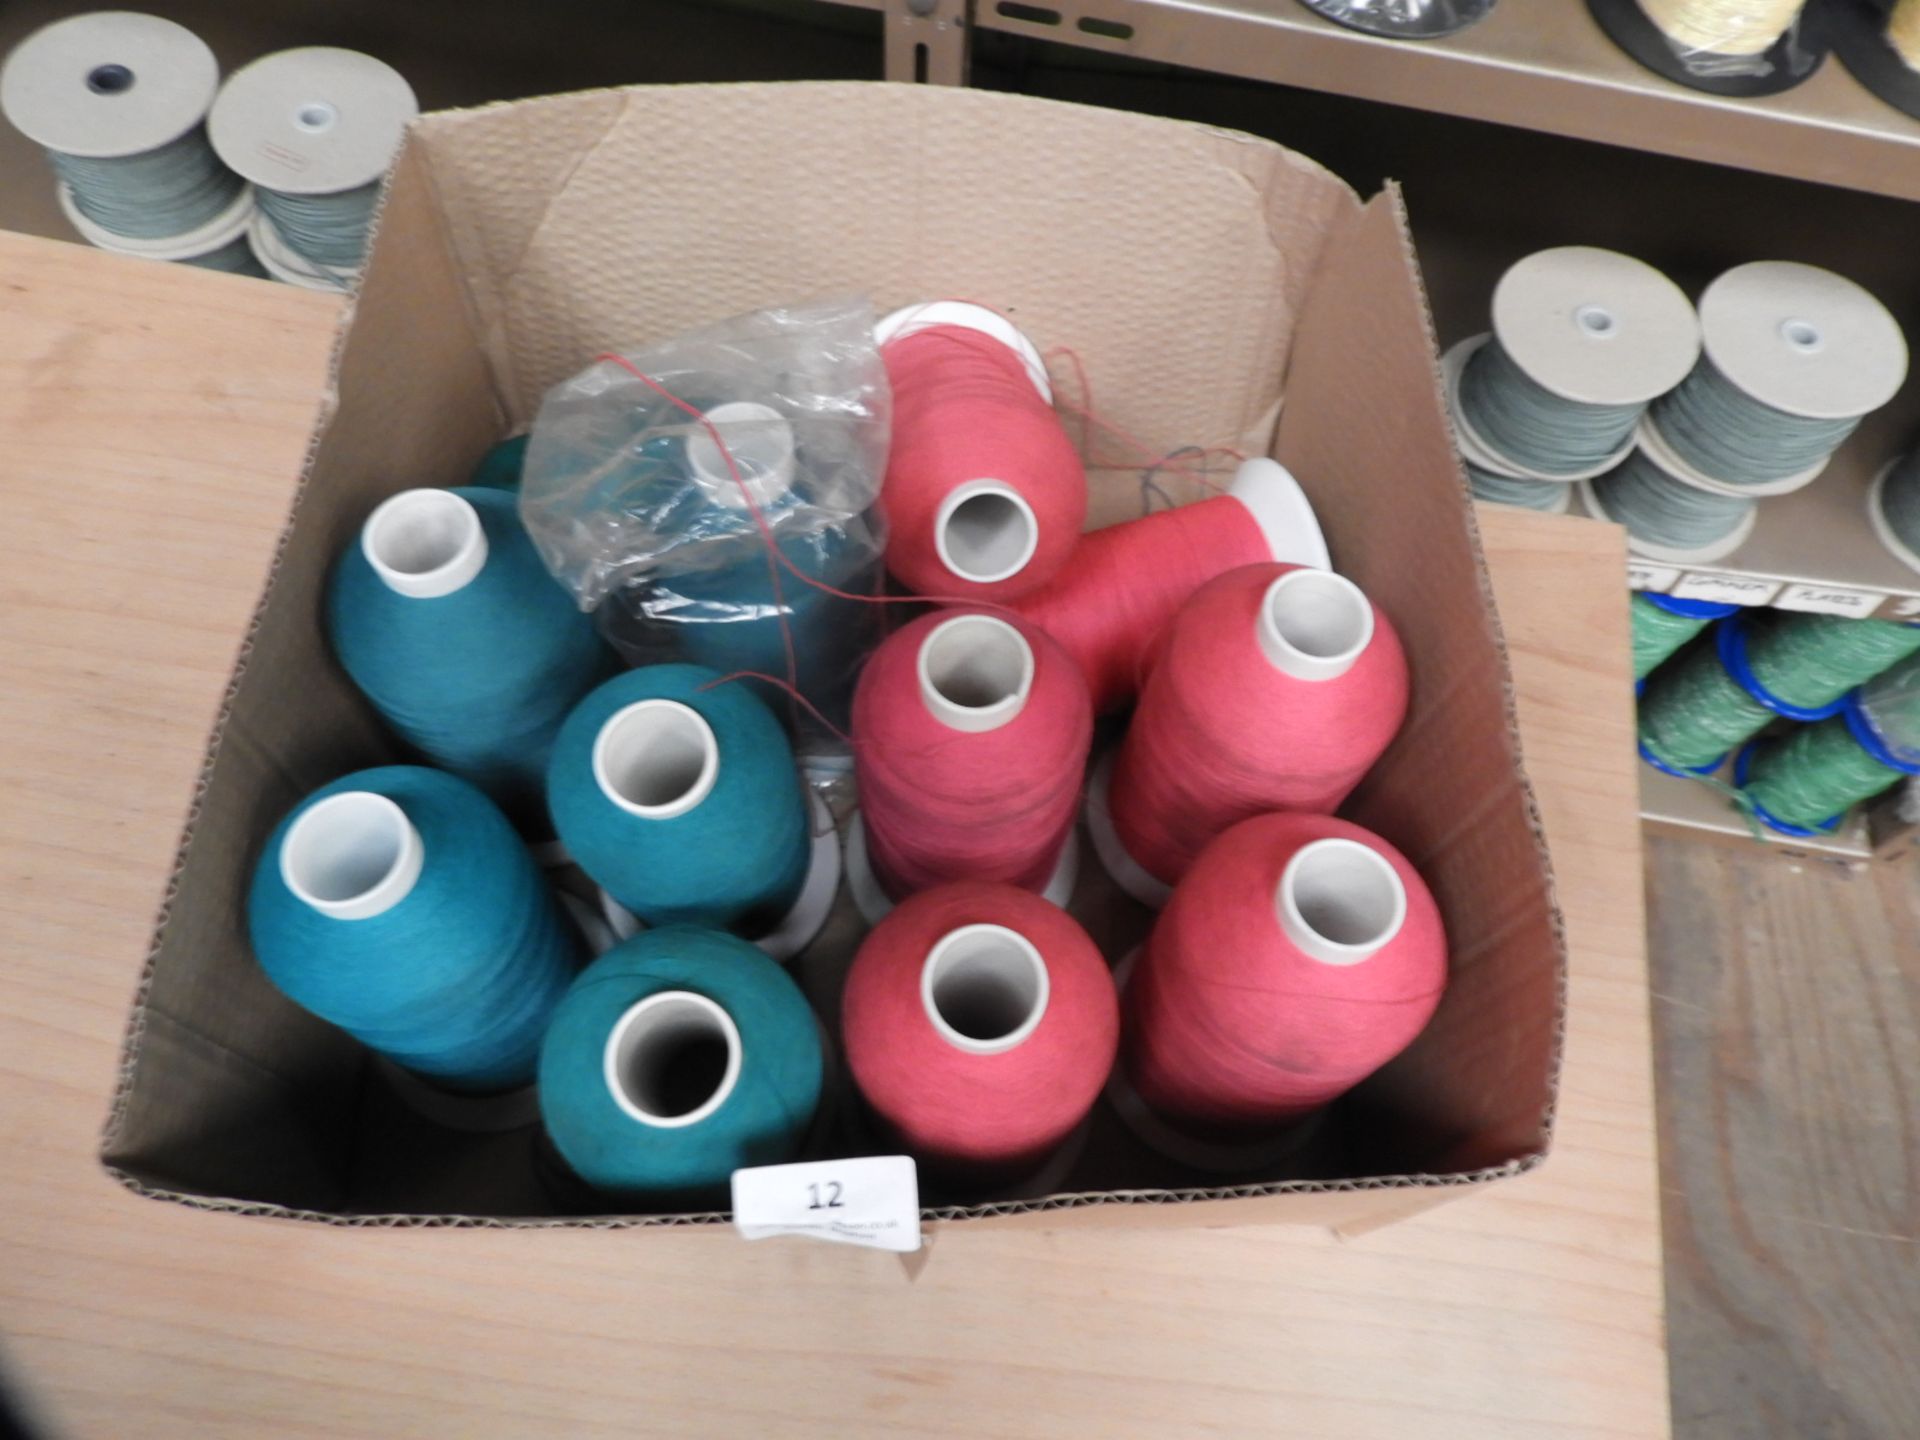 *Box Containing Twelve Cones of Sewing Thread (as